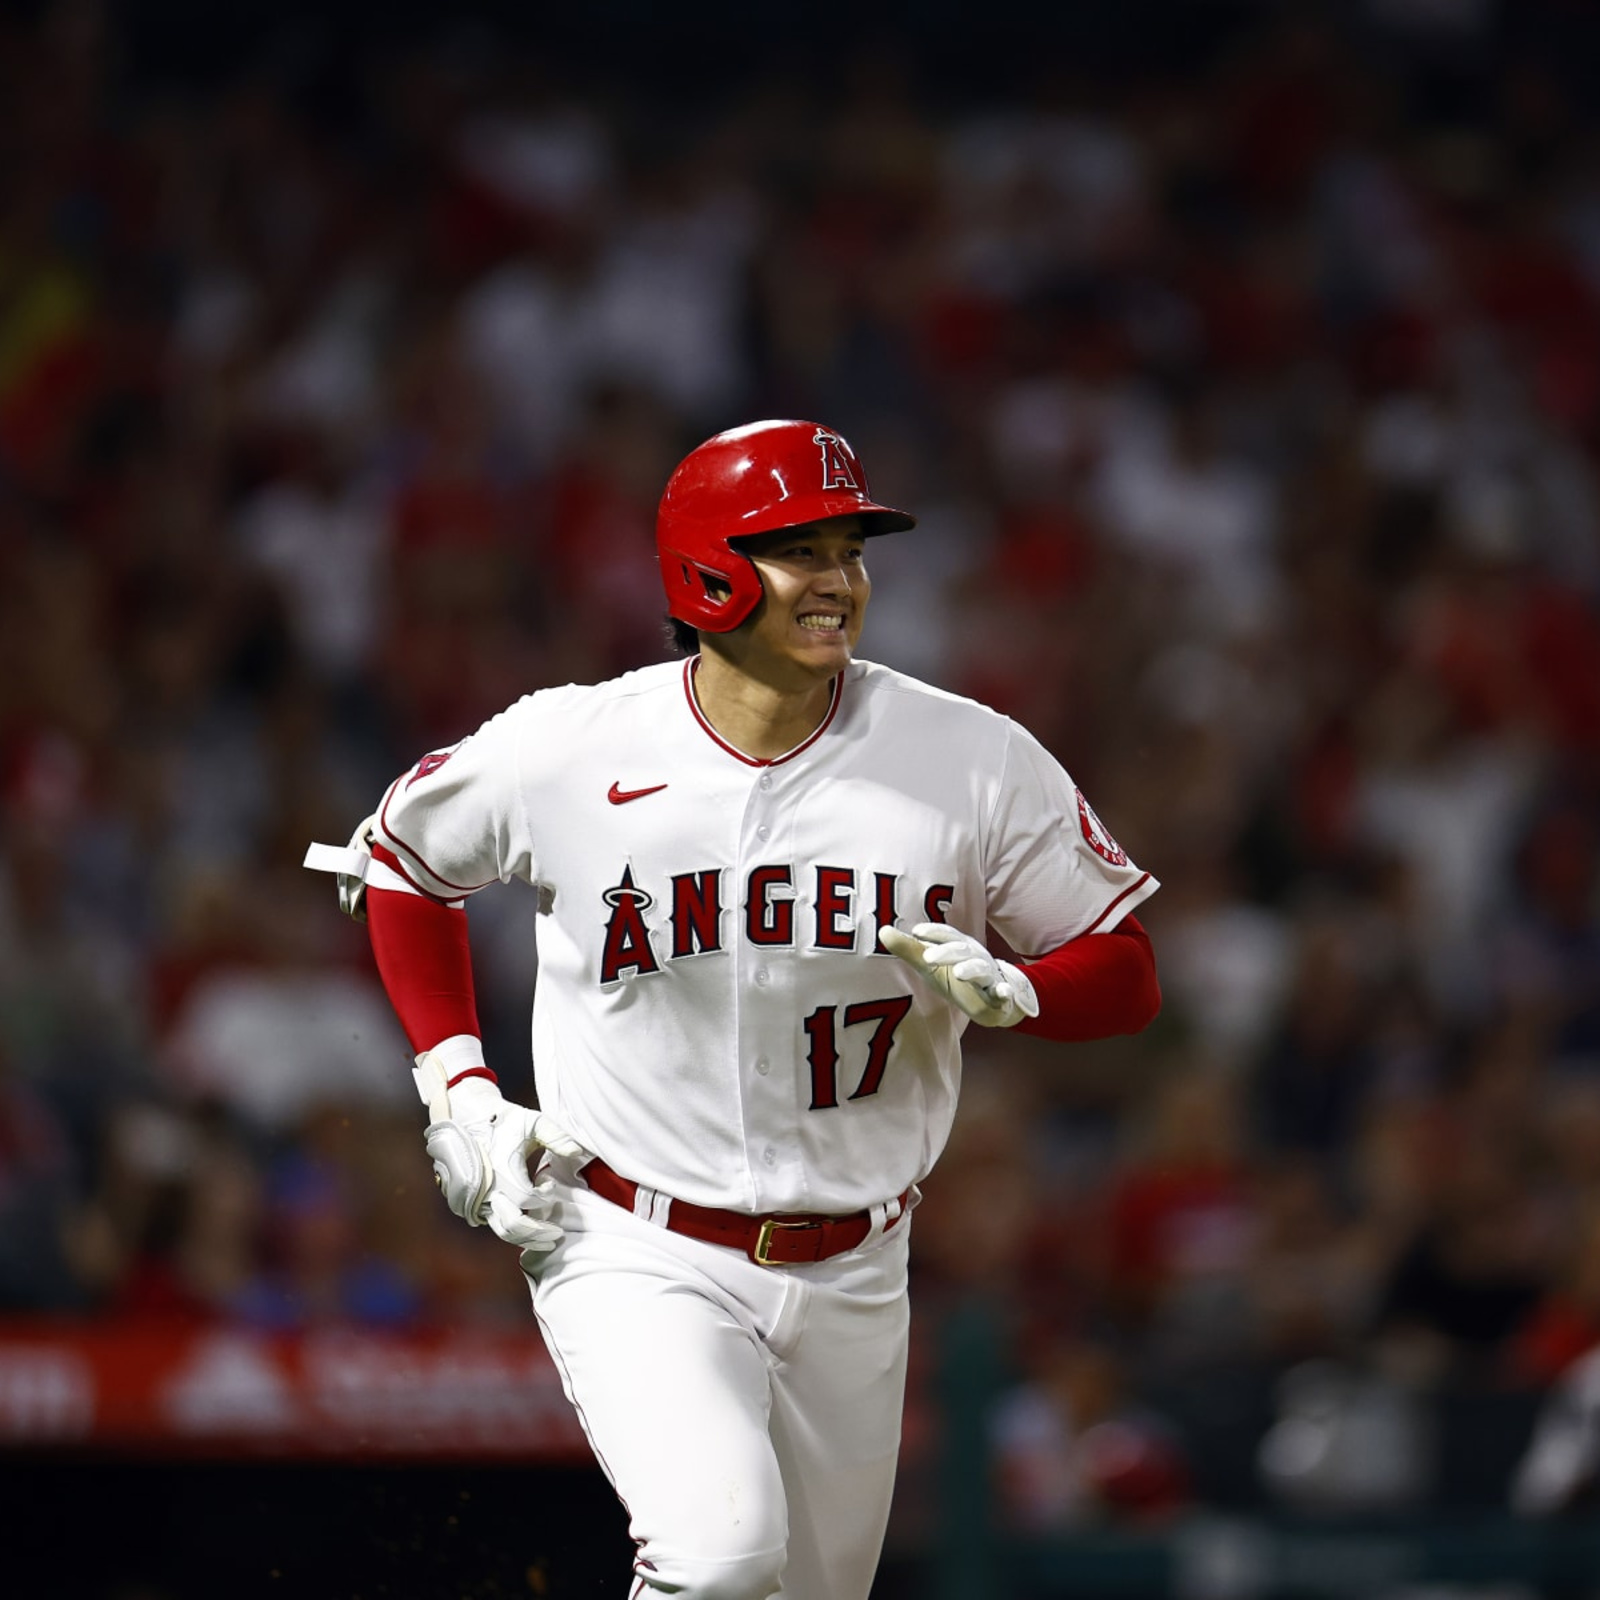 Lupica: Mets and Yankees have little to offer Shohei Ohtani